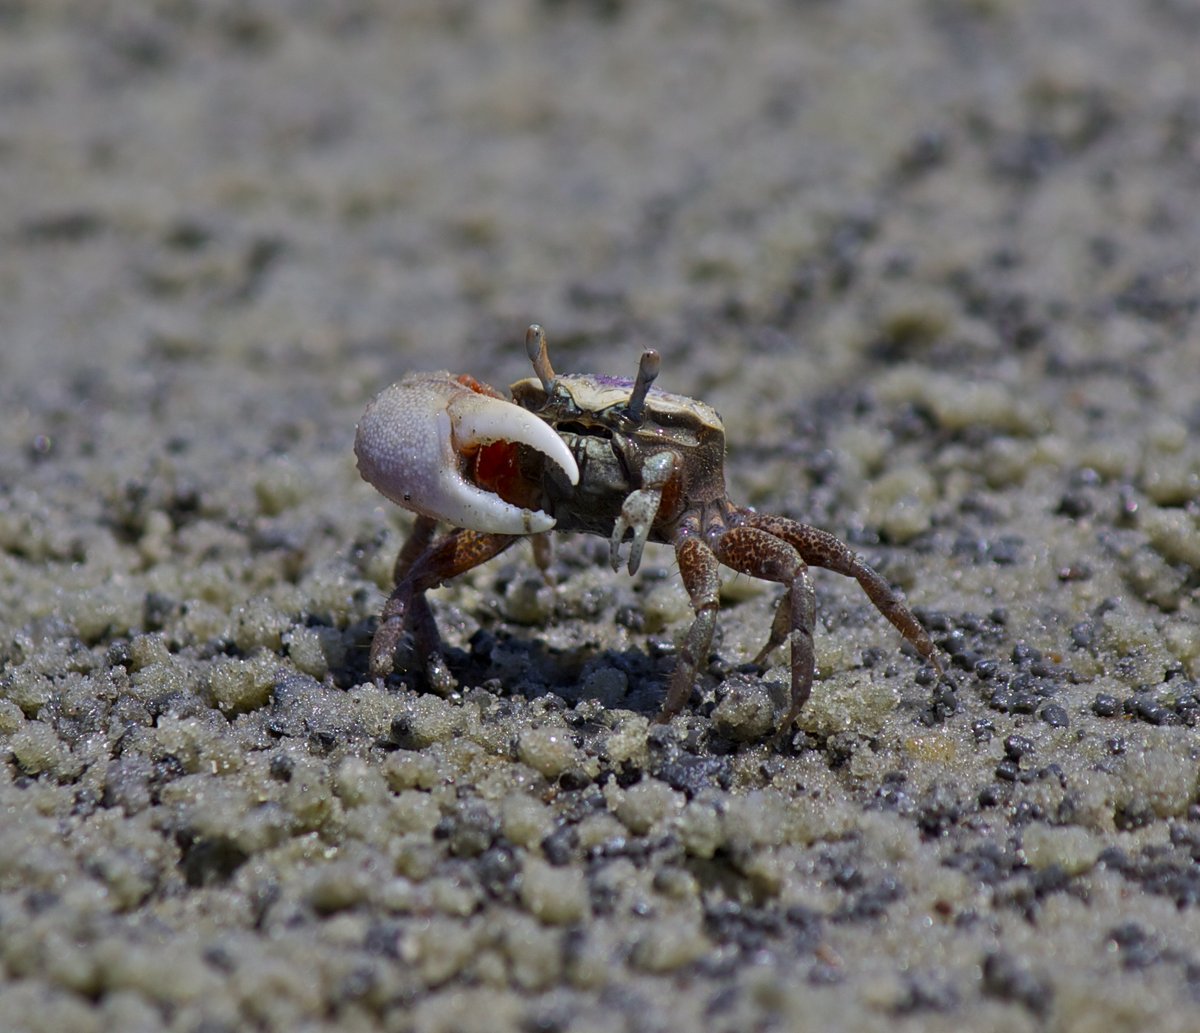 #EstuaryLove is in the air! This male fiddler crab uses its claw to attract a mate. #iHeartEstuaries #NCNatureFriday